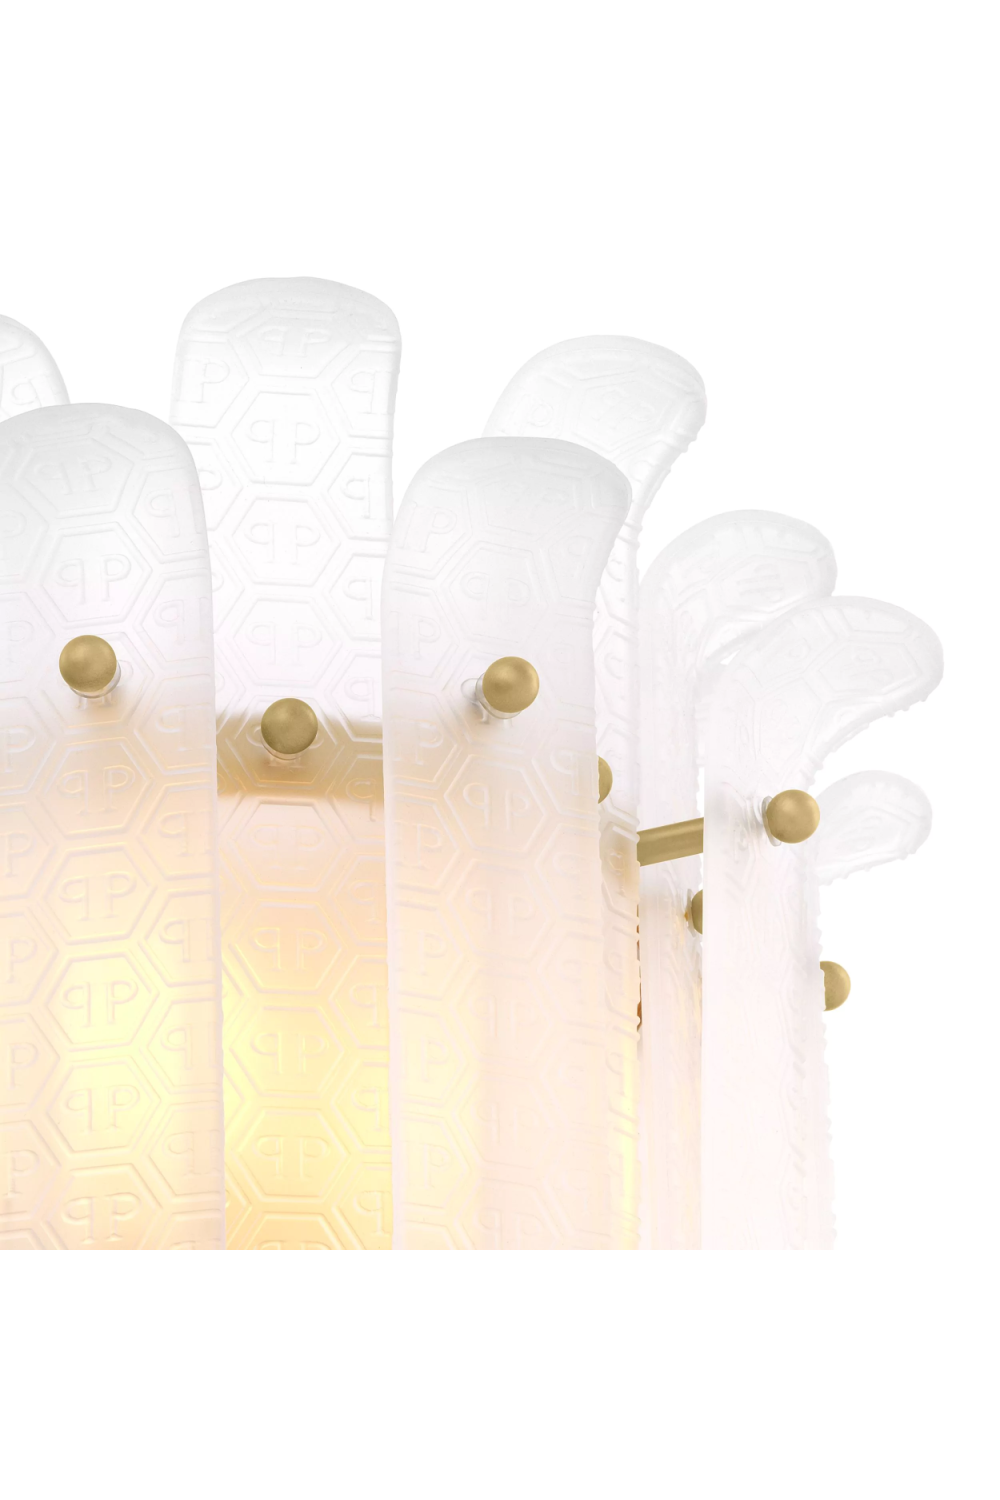 Frosted Contemporary Glass Wall Lamp | Philipp Plein Rodeo Drive | Oroa.com